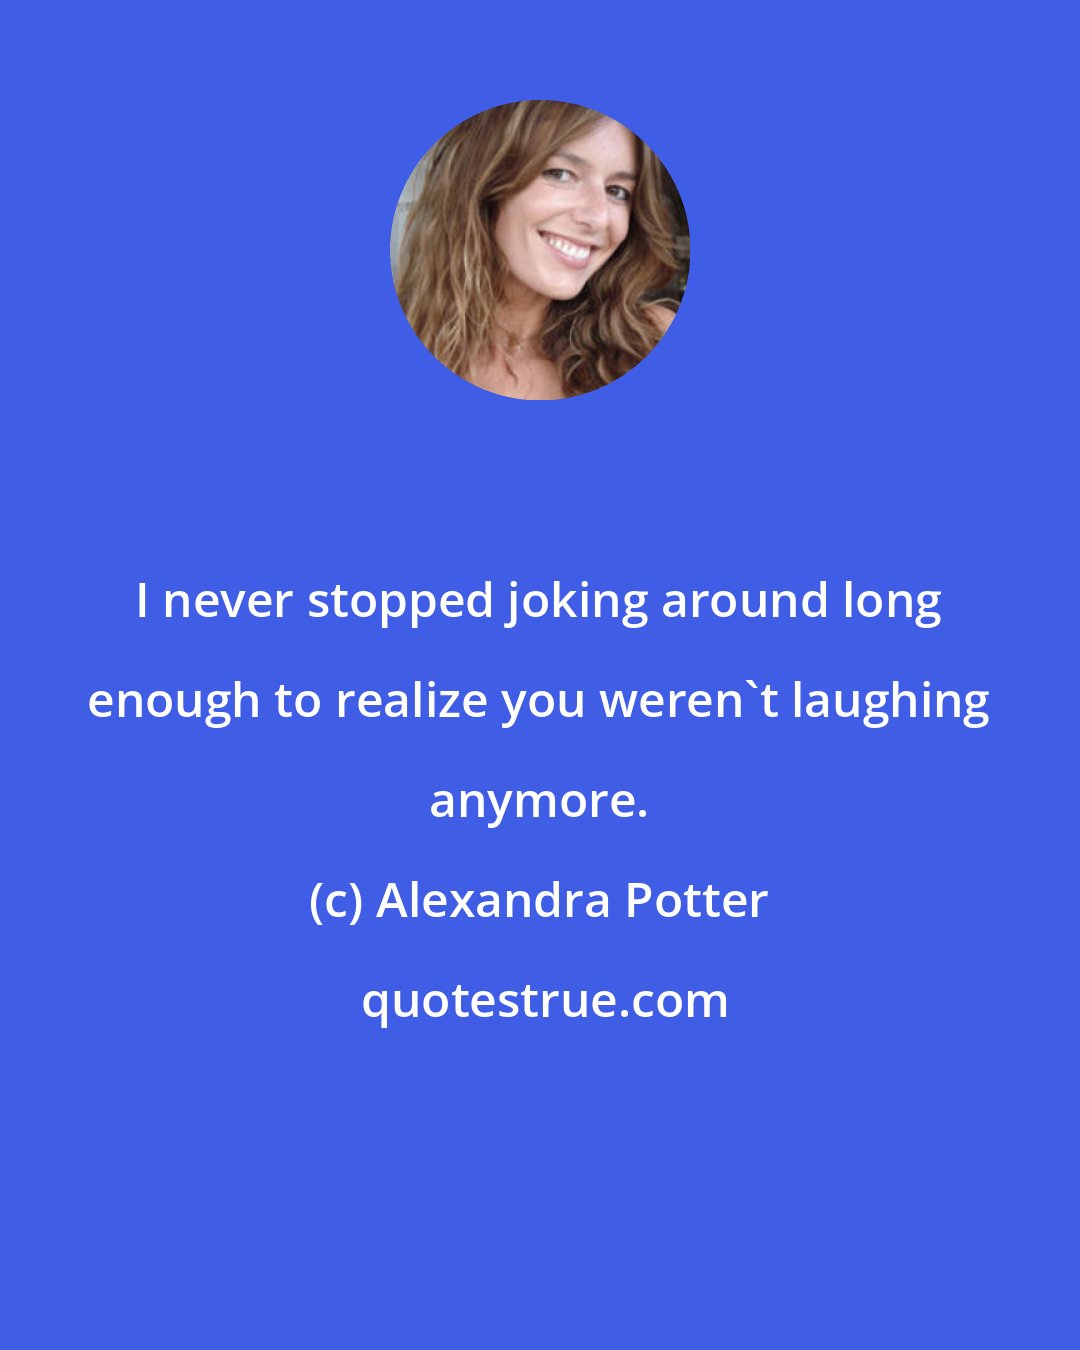 Alexandra Potter: I never stopped joking around long enough to realize you weren't laughing anymore.